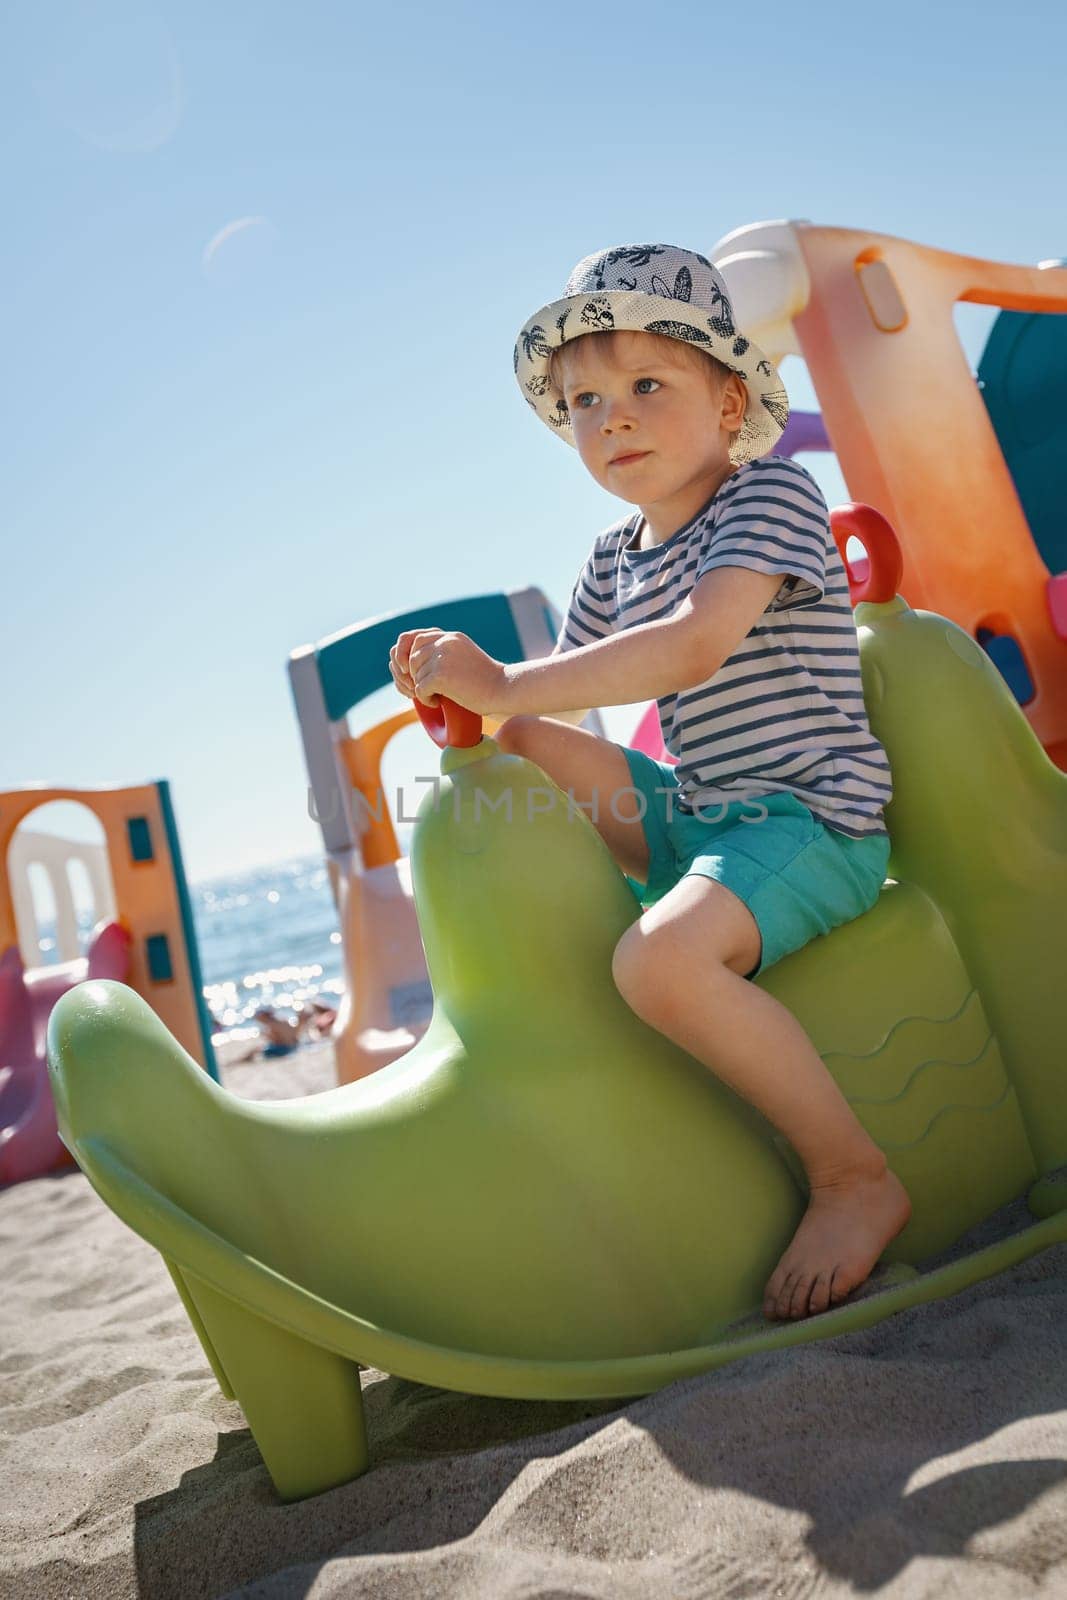 A little boy poses on a green plastic toy at a beach playground. Sand, sea and light blue sky in the background